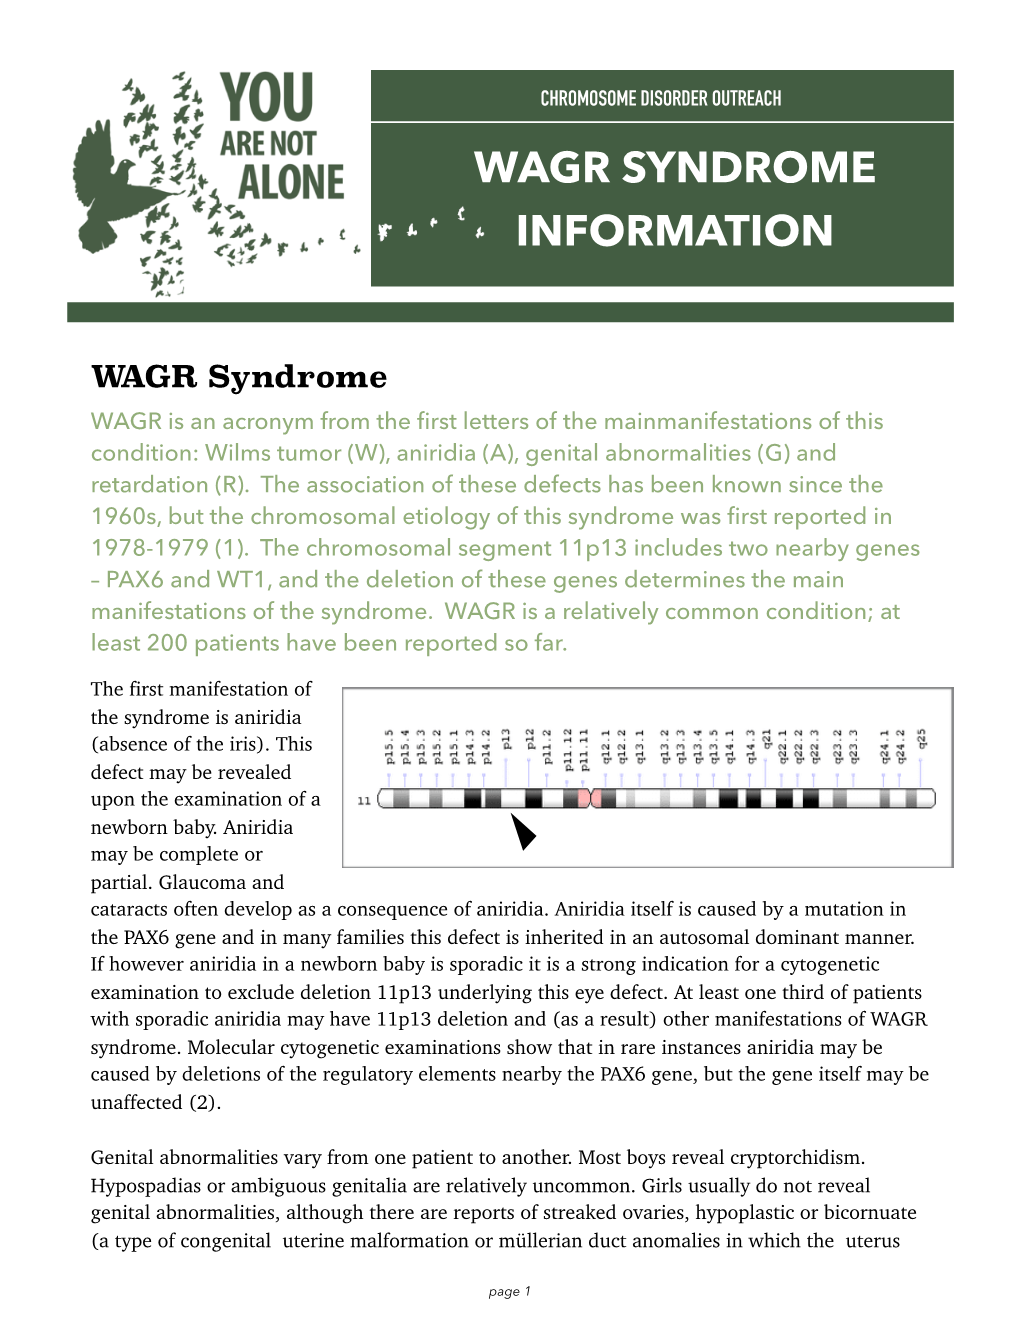 Wagr Syndrome Information